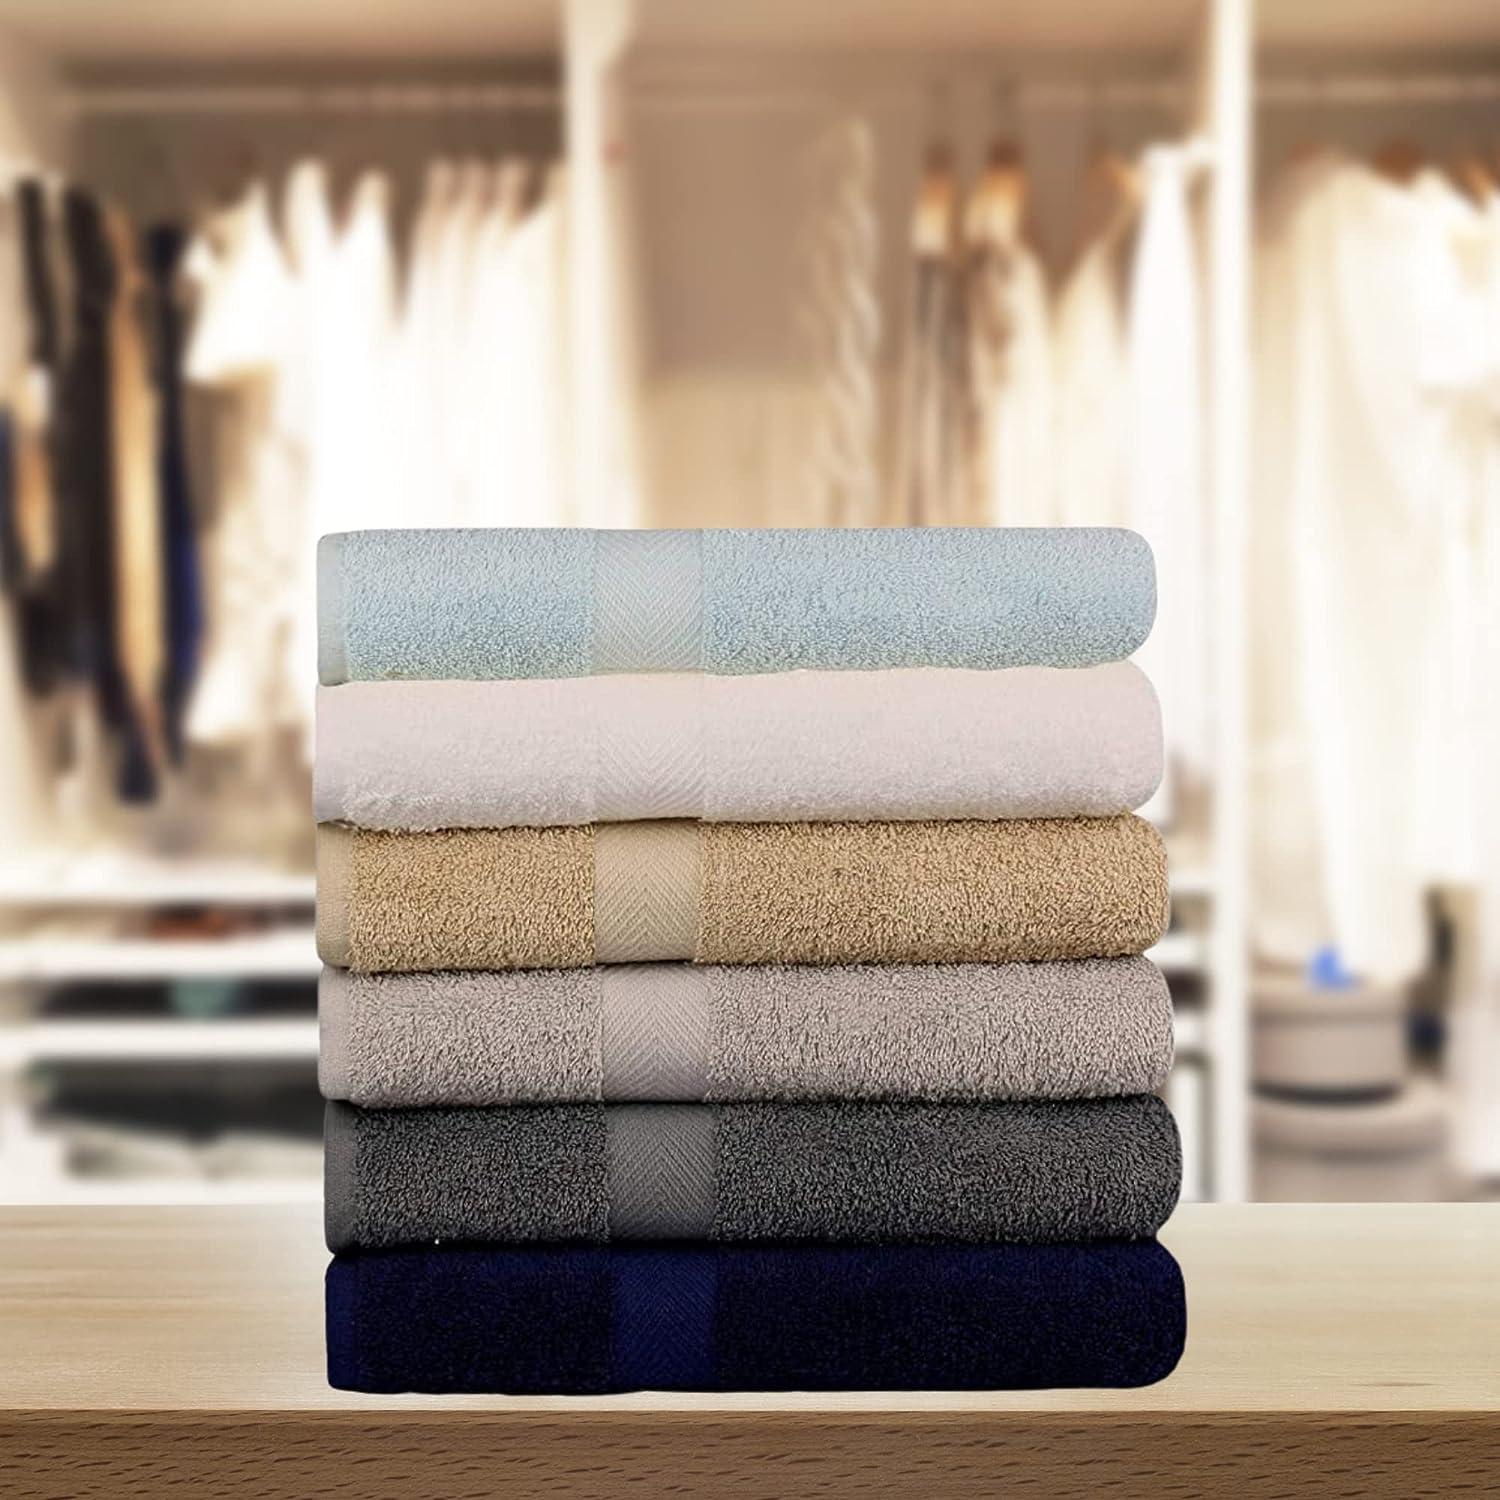 Best Towel KAHAF Collection 6-Pack Bath Towels - Lightweight - Extra Absorbent - 100% Cotton - Shower Towels (Multi, 27 inchesx54 inches)